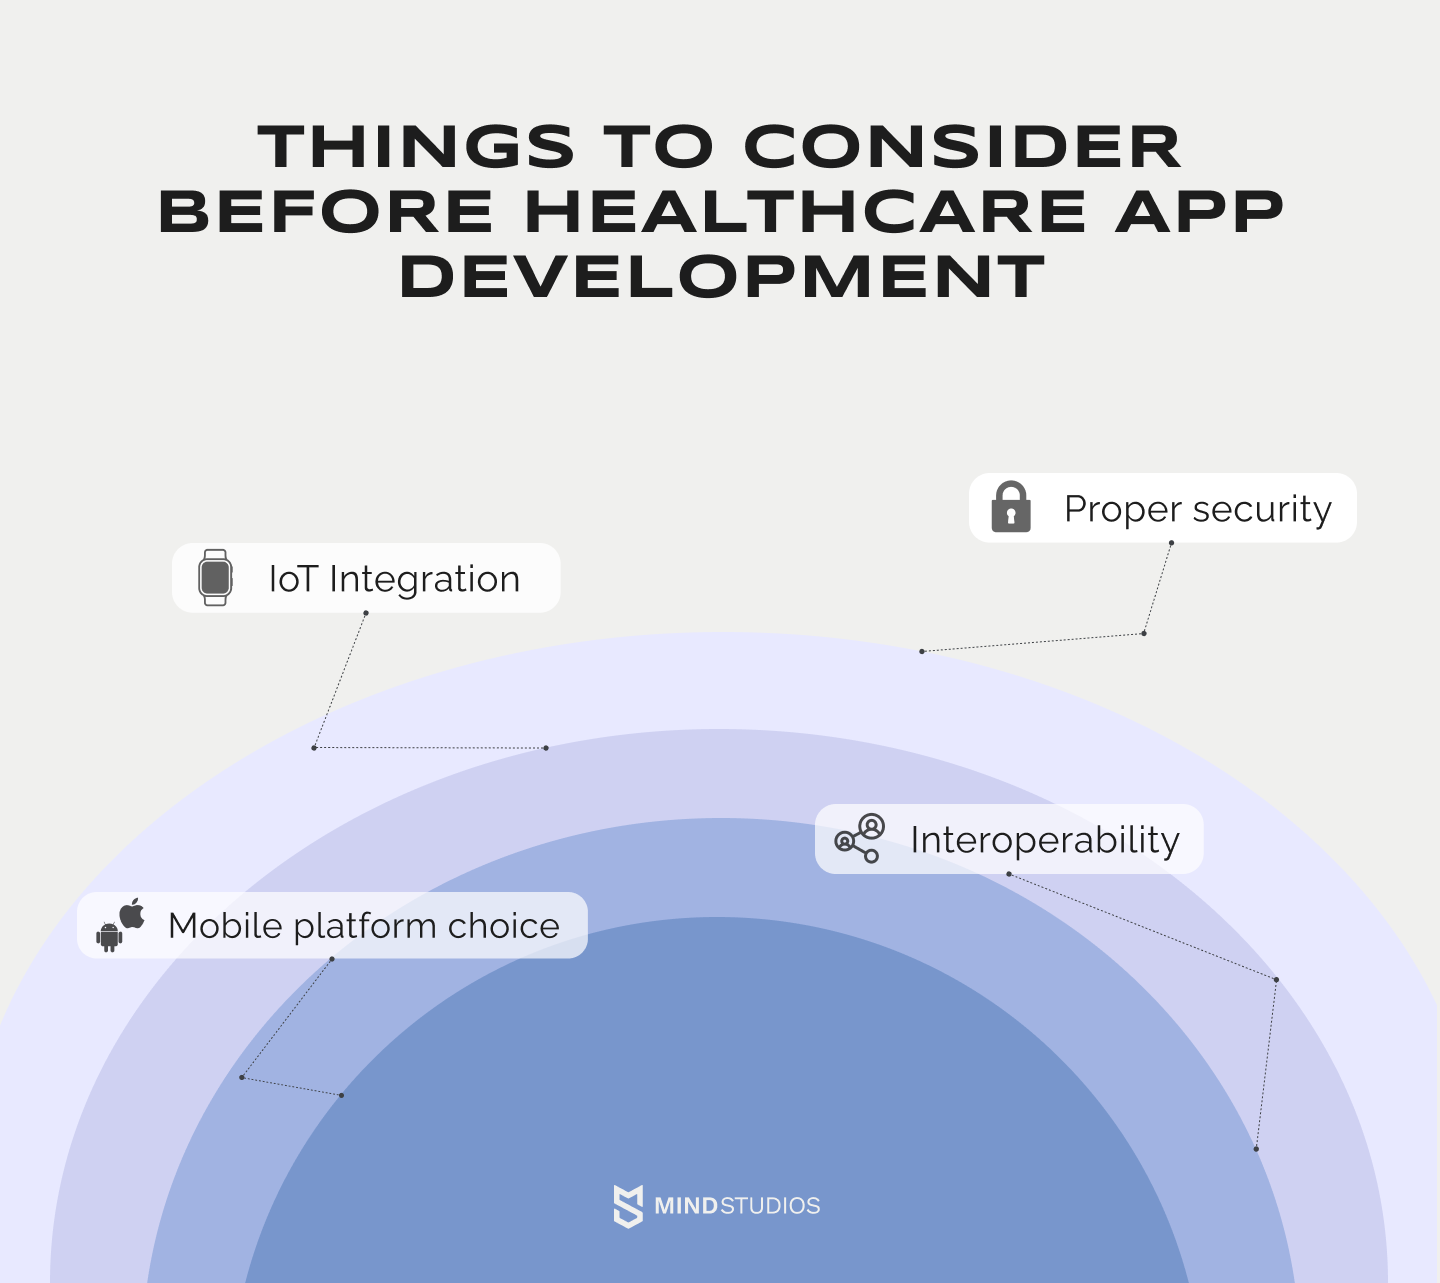 Things to consider before healthcare app development